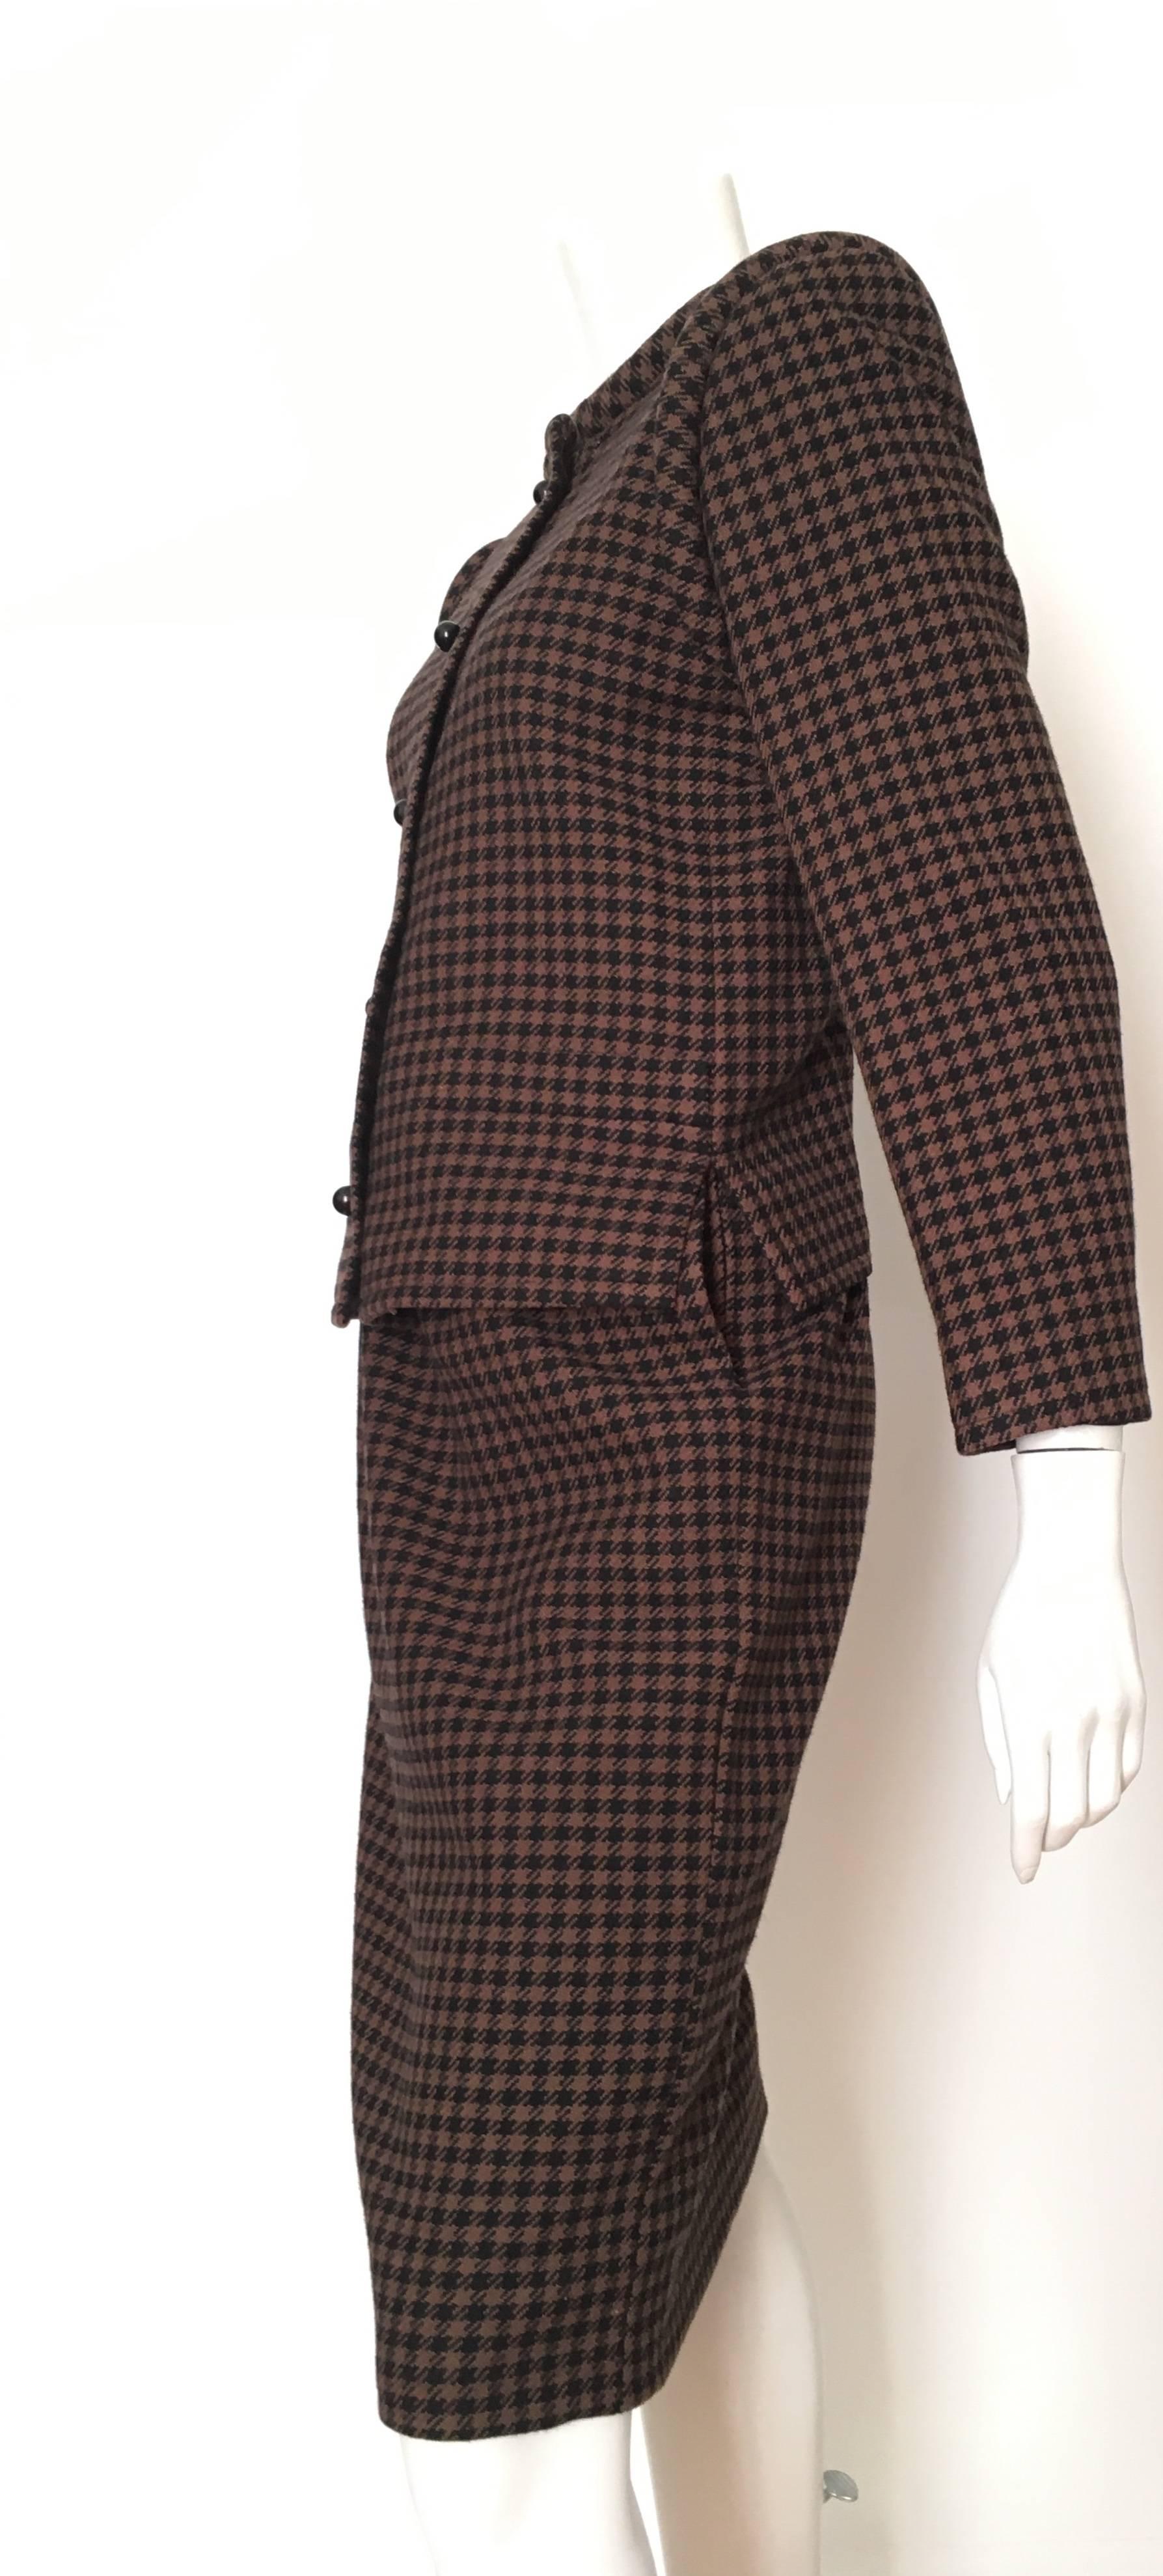 Nina Ricci 1970s Wool Brown and Black Houndstooth Jacket and Skirt Set Size 6. For Sale 2